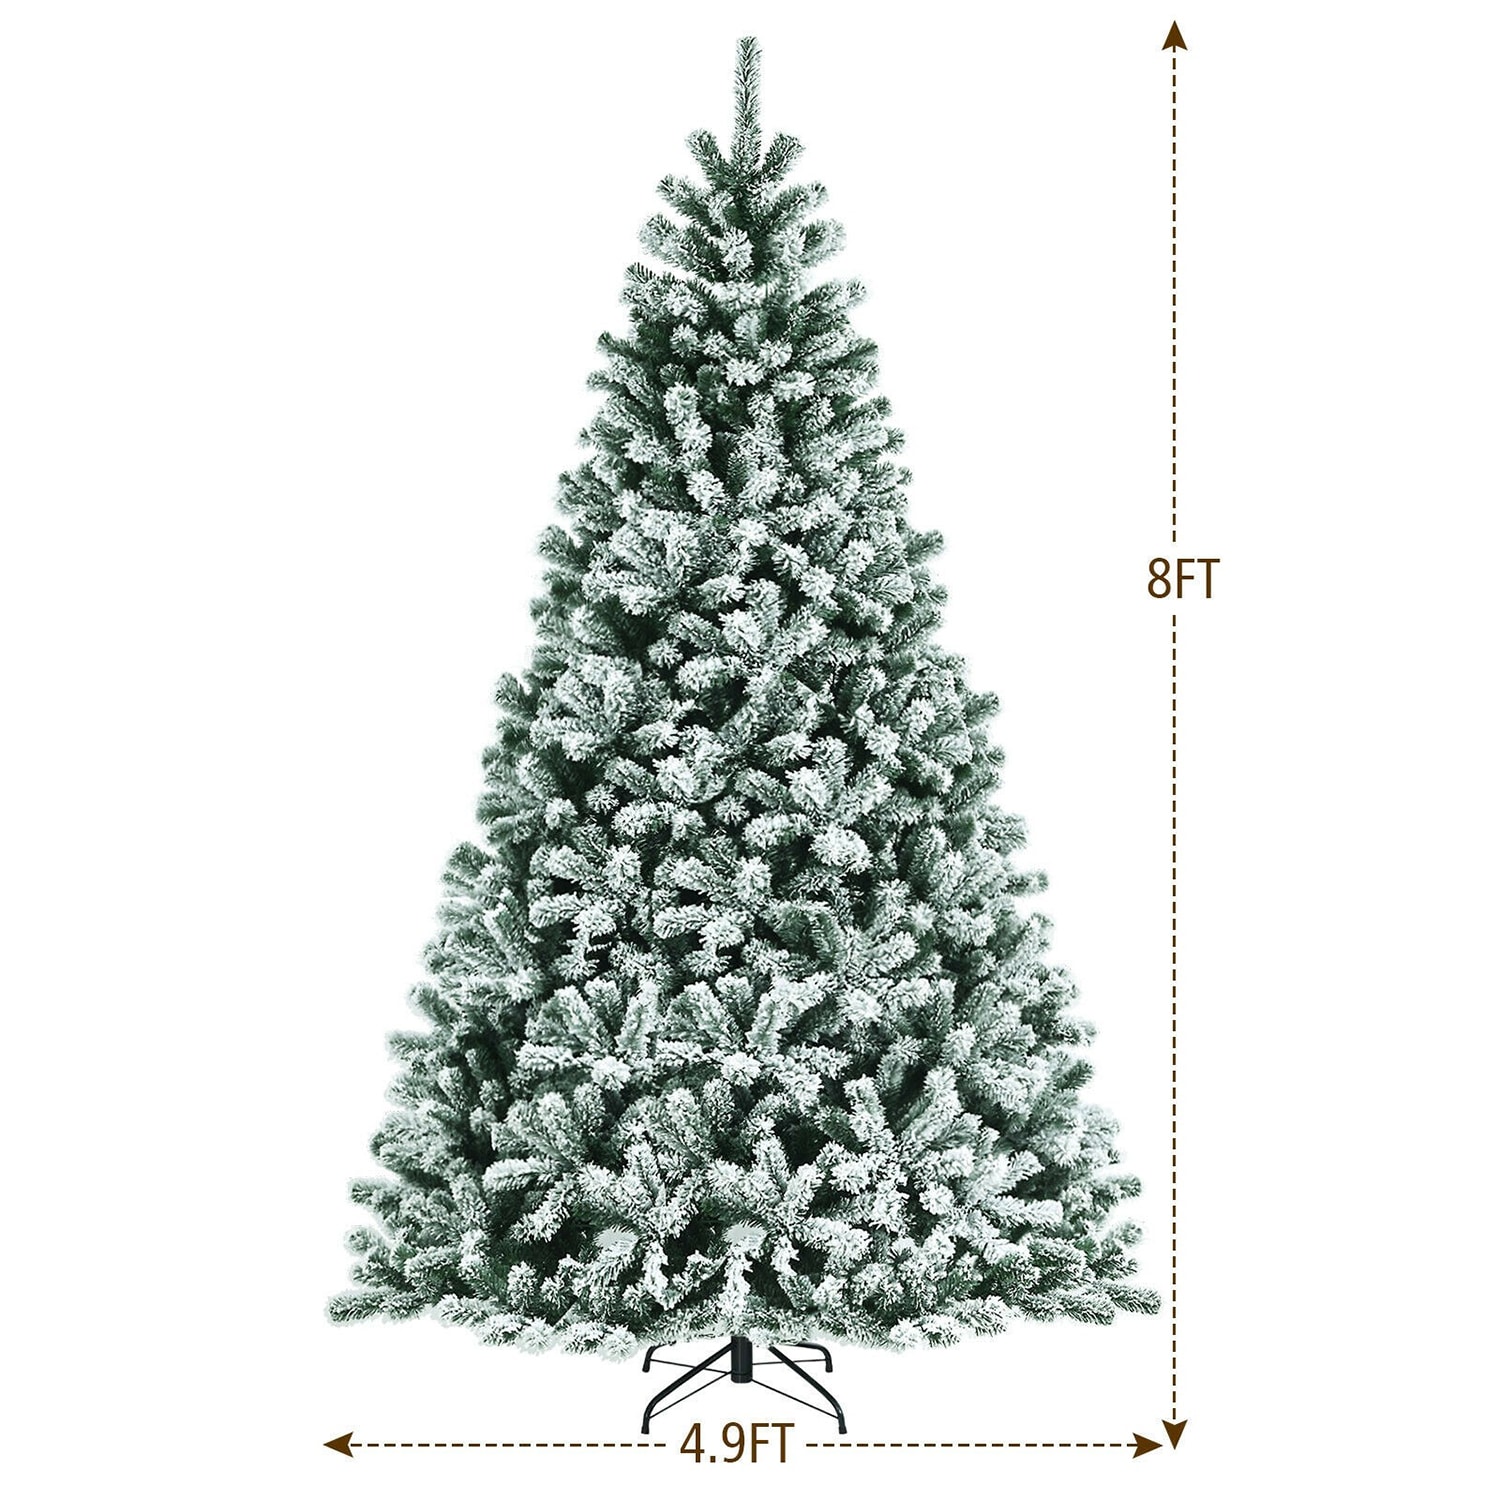 15 Inch Pre-Lit Hand-Painted Ceramic National Christmas Tree - Costway